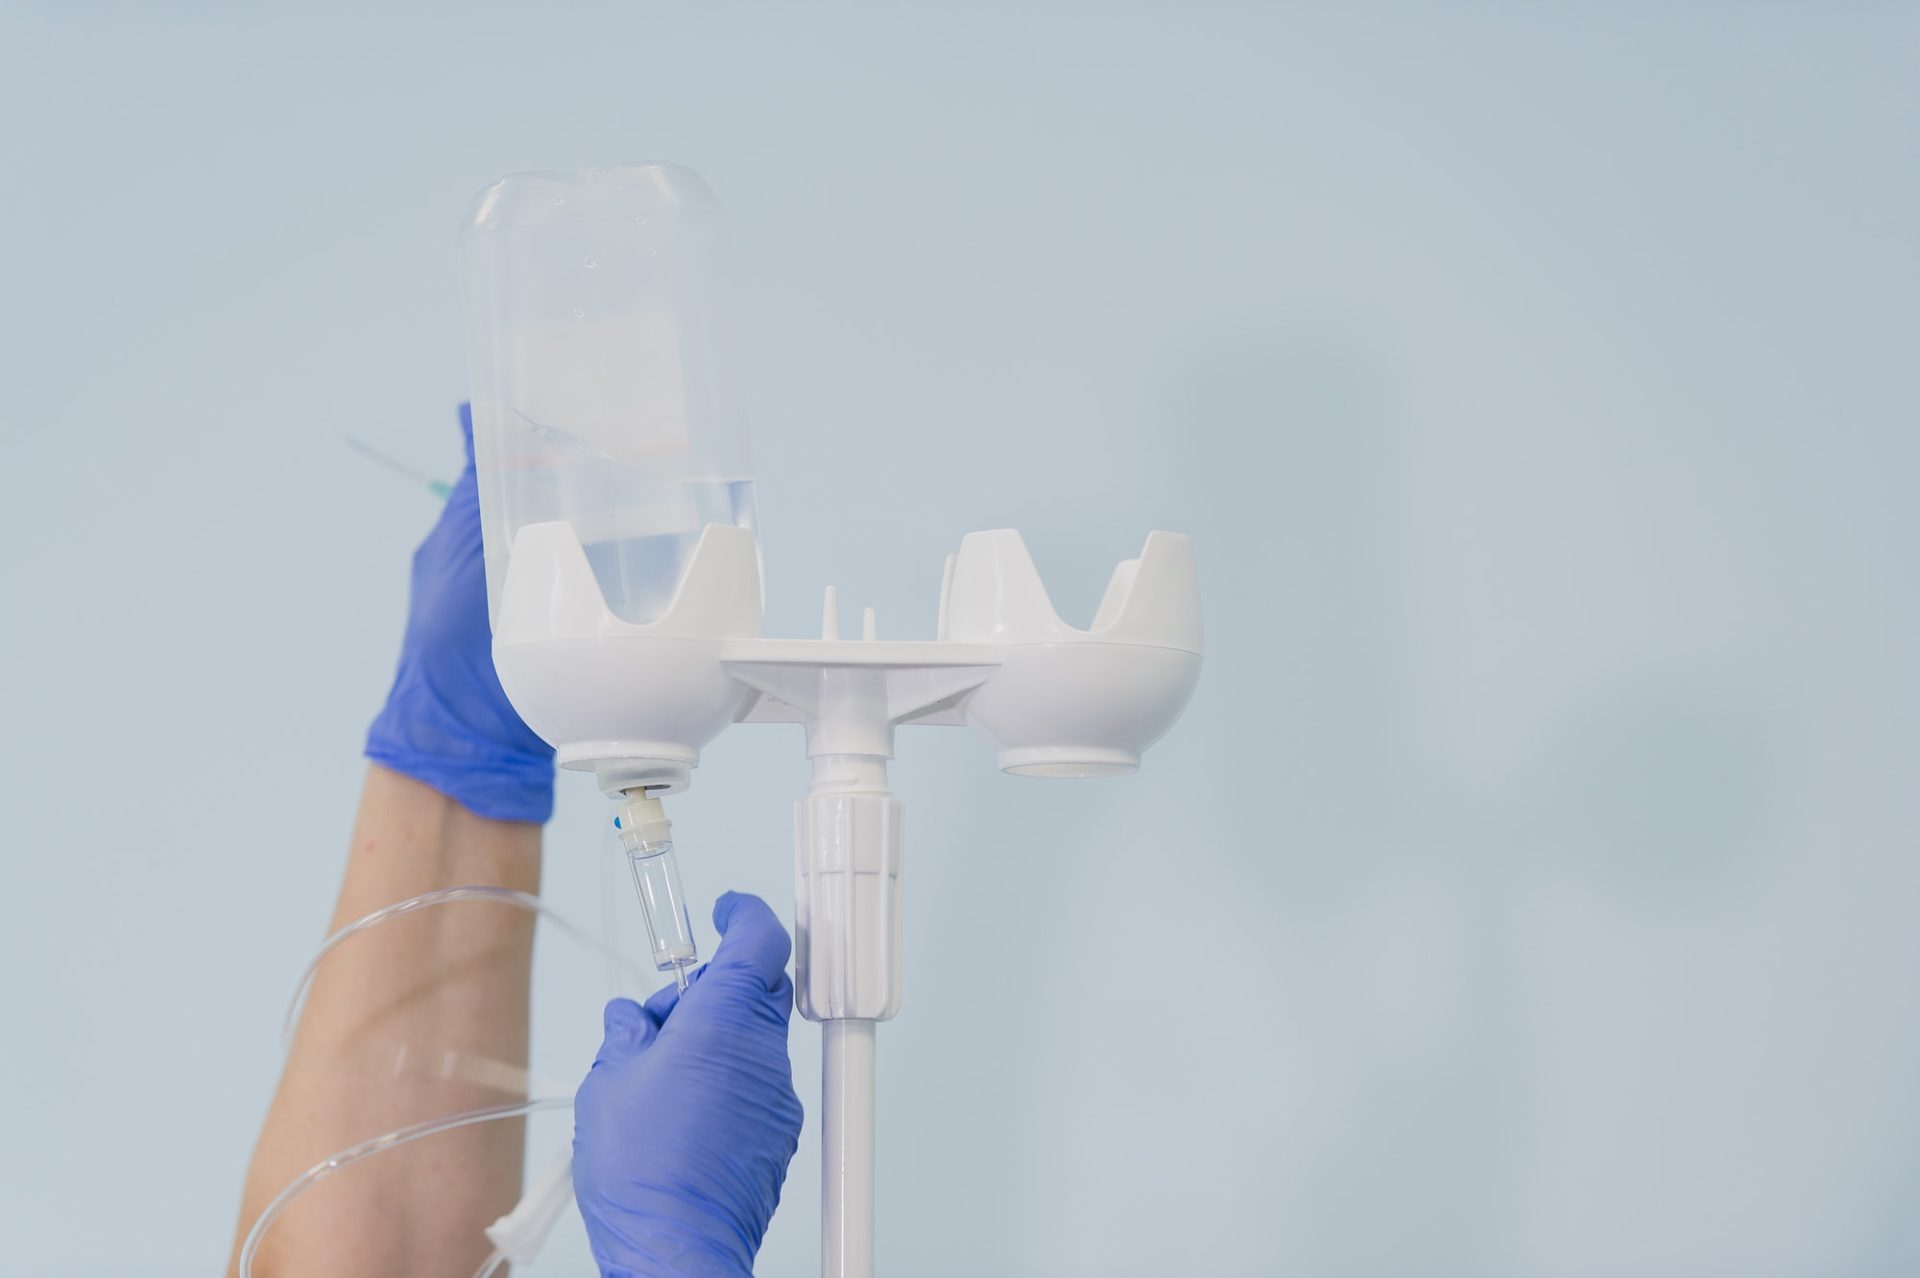 Doctor's hands and infusion drip in hospital on blurred background